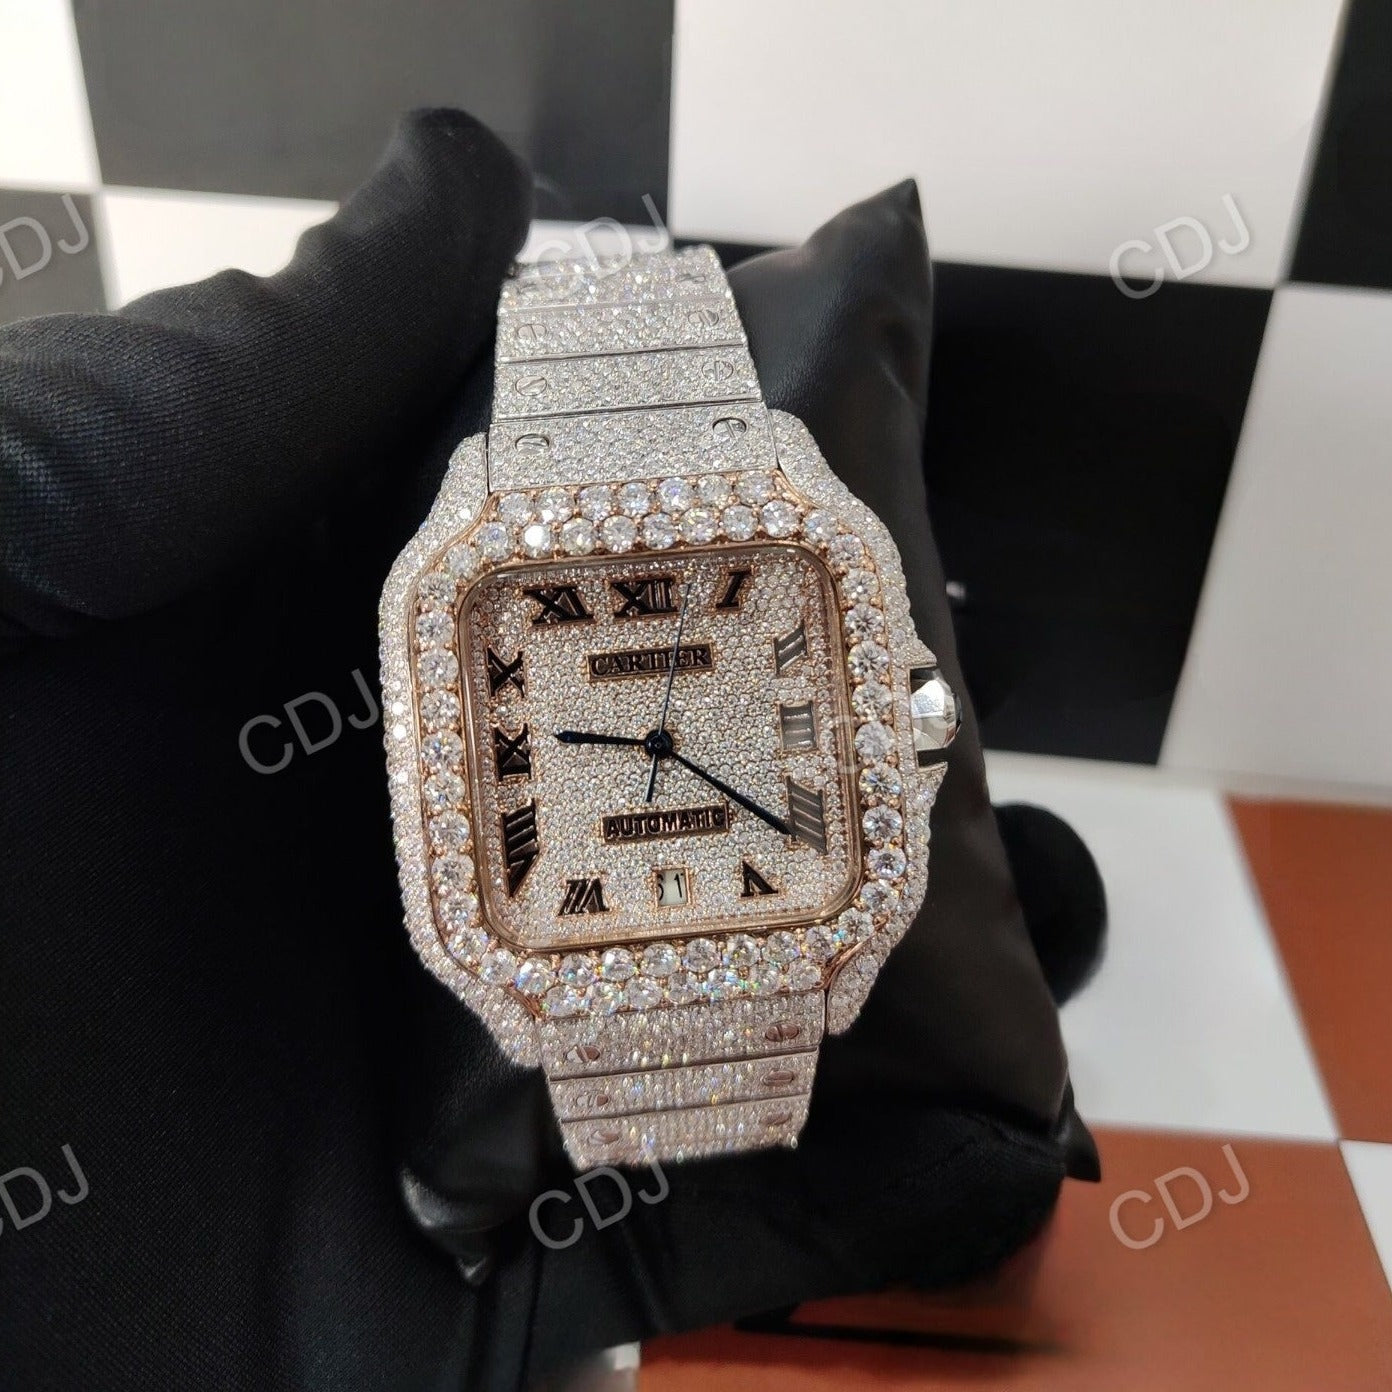 Men's Luxurious Iced Out Timepieces VVS Moissanite Studded Cartier Full Buss Down Watch 25 to 28 Carats (Approx.)